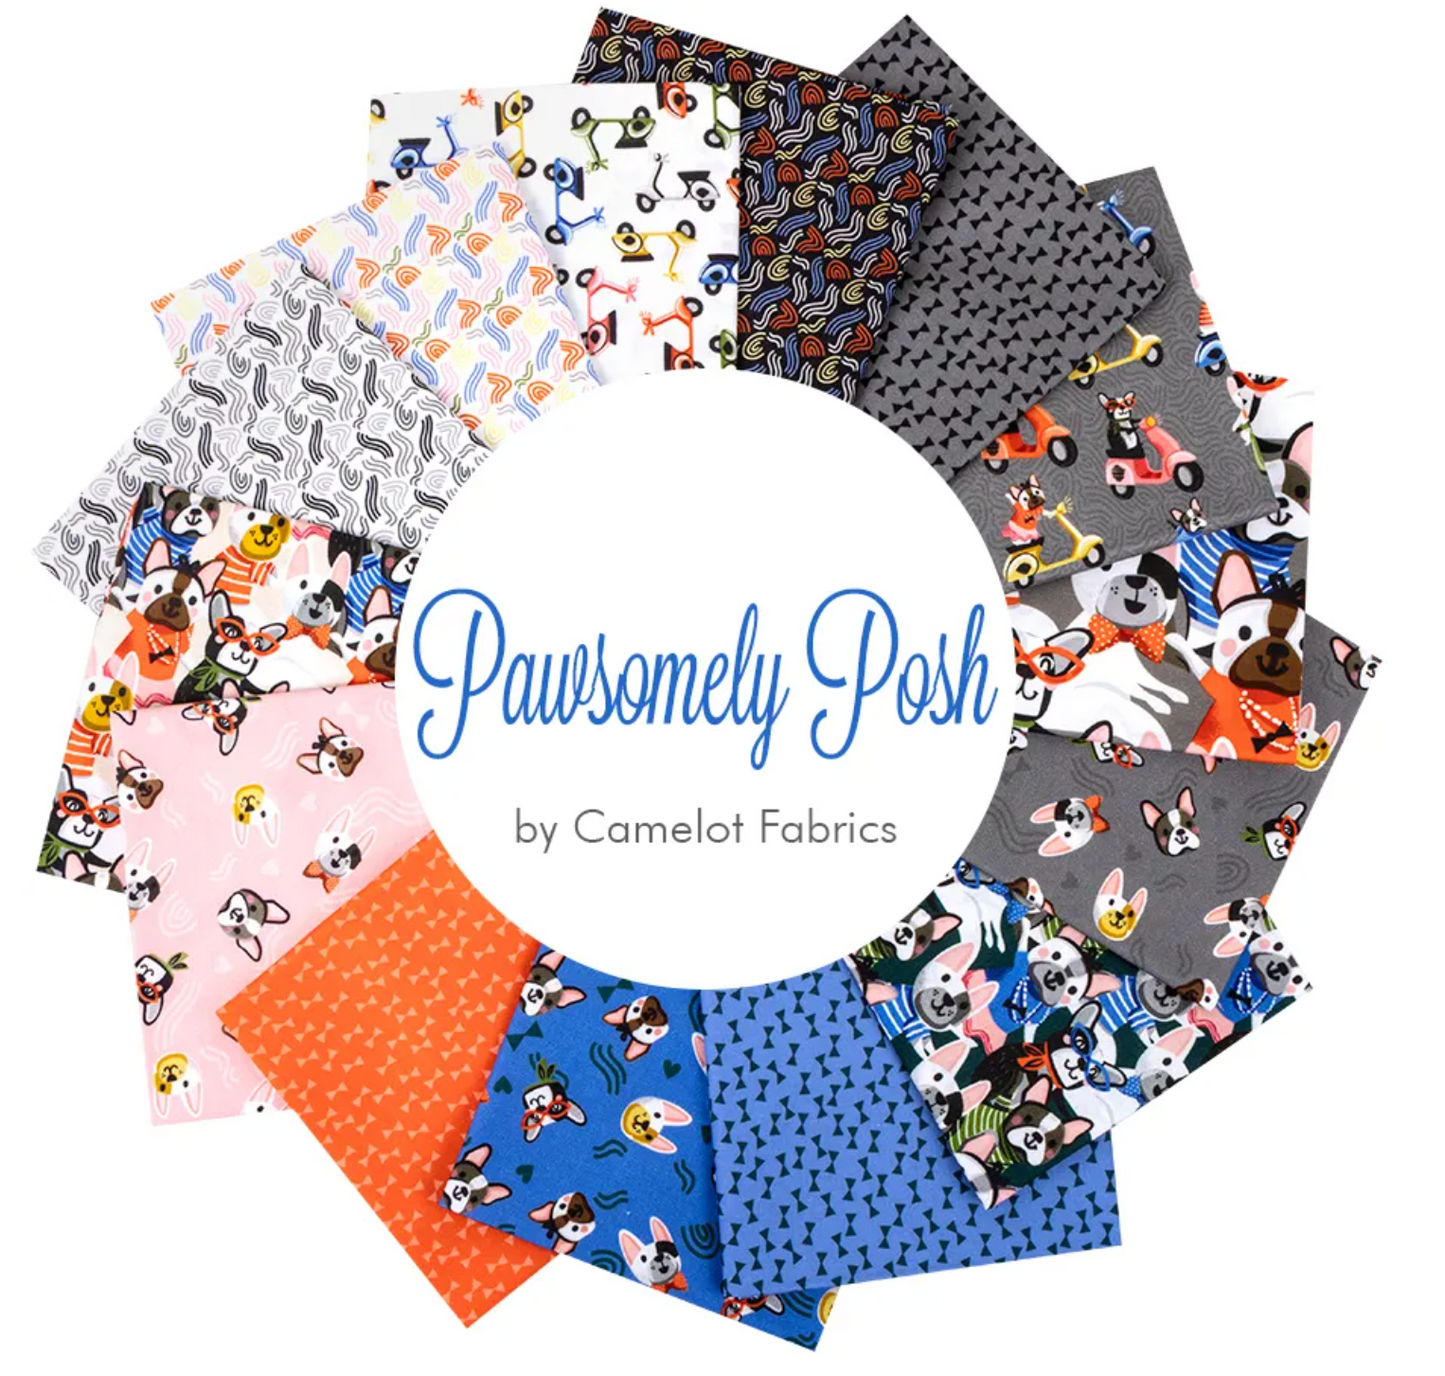 Quilting 5" Charm Pack Squares Pawsomely Posh By Arrolynn Weirderhold For Camelot Fabrics.